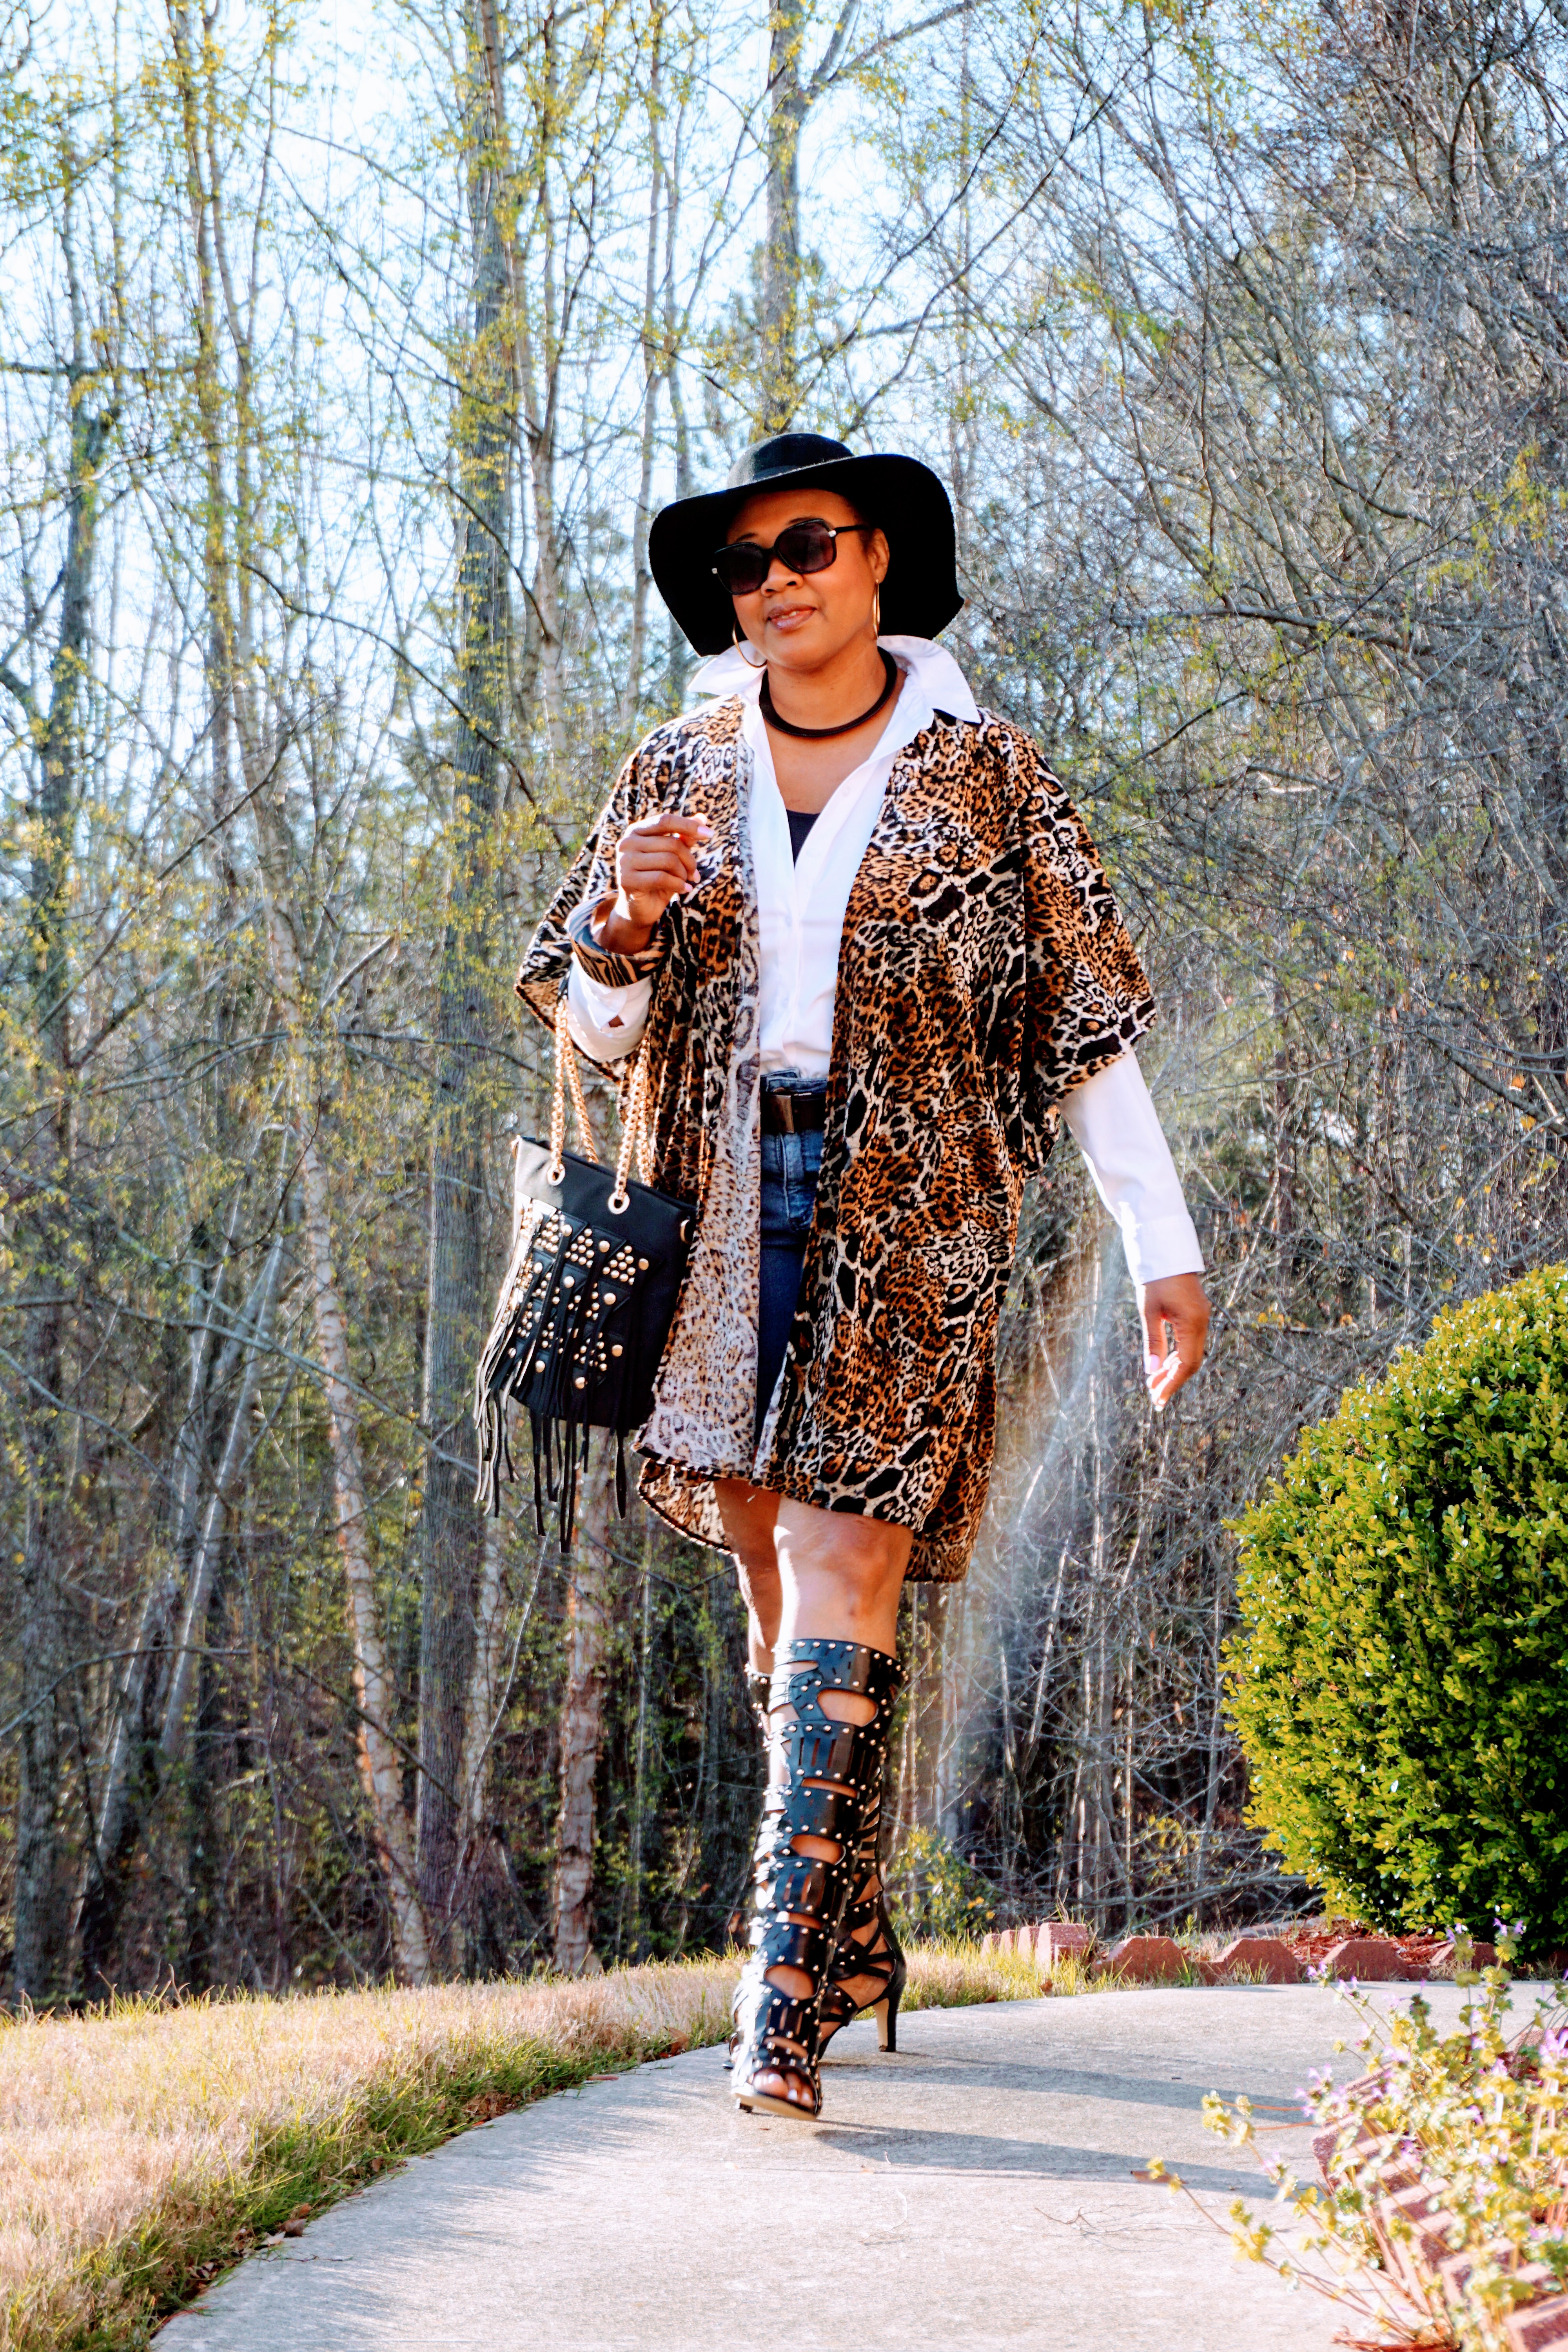 A Midnight Velvet customer in sunglasses, a white shirt, animal print cardigan, black studded boots, and a black hat.